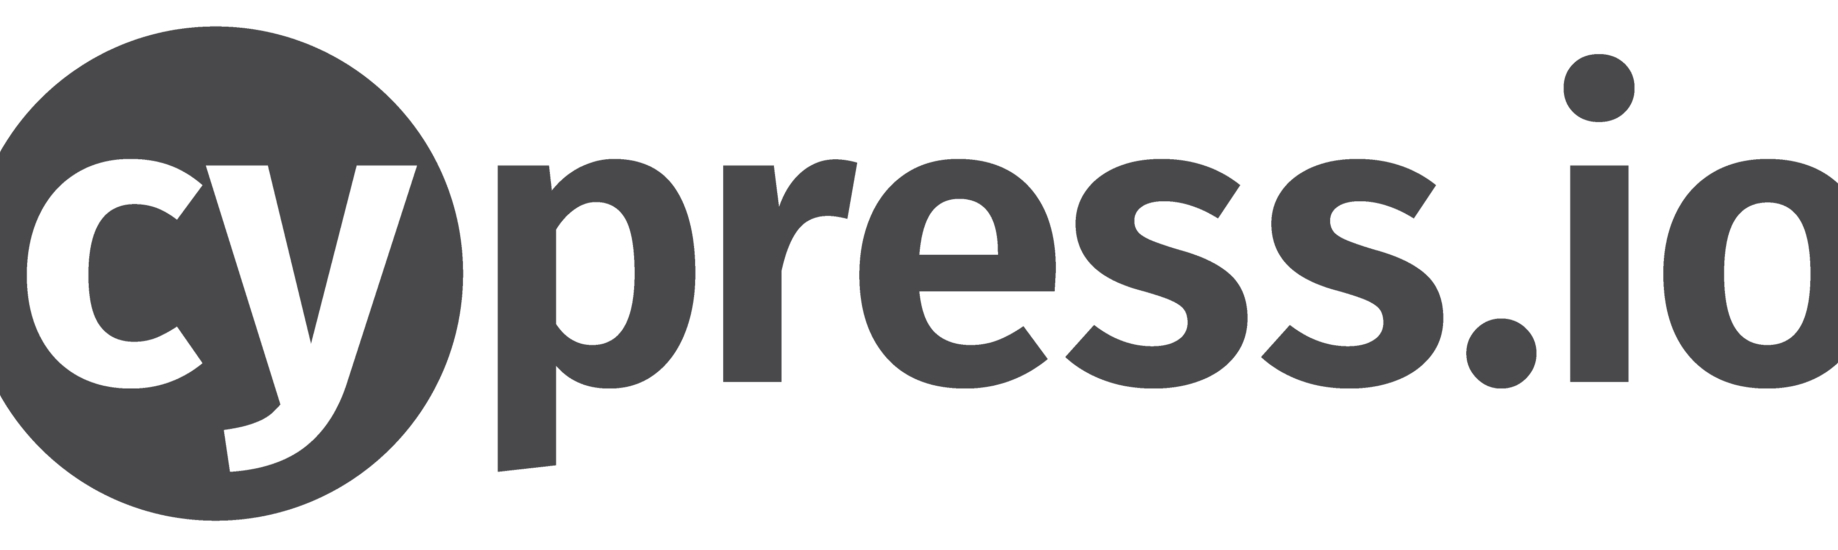 Cypress Logo - Tutorial: JavaScript End to End Testing with Cypress